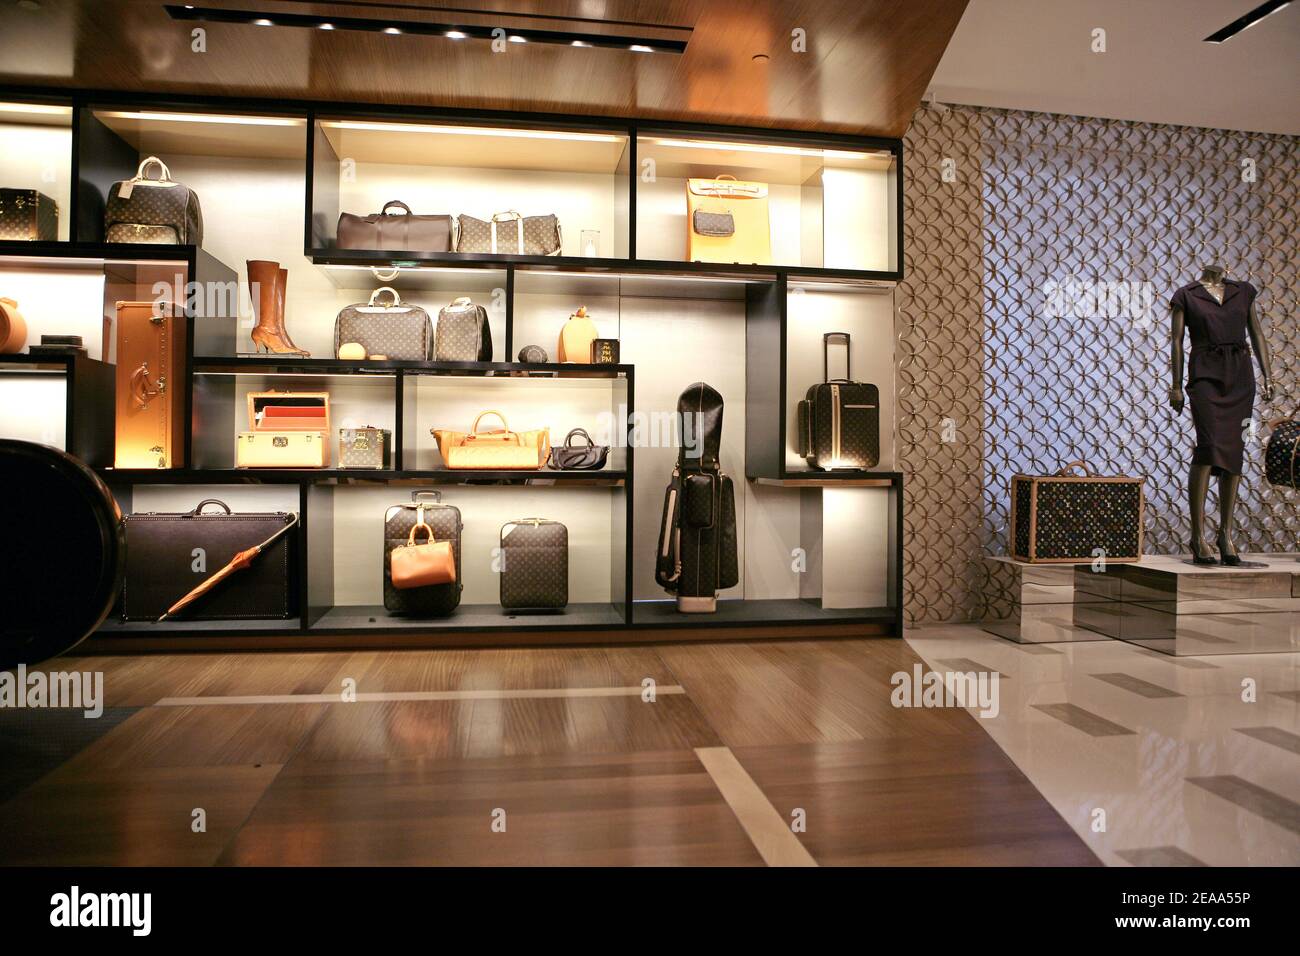 Inside view of the new Louis Vuitton store of the Champs Elysees avenue in  Paris, France on october 20, 2005. The store is the world's biggest luxury  store. The newly remodeled store